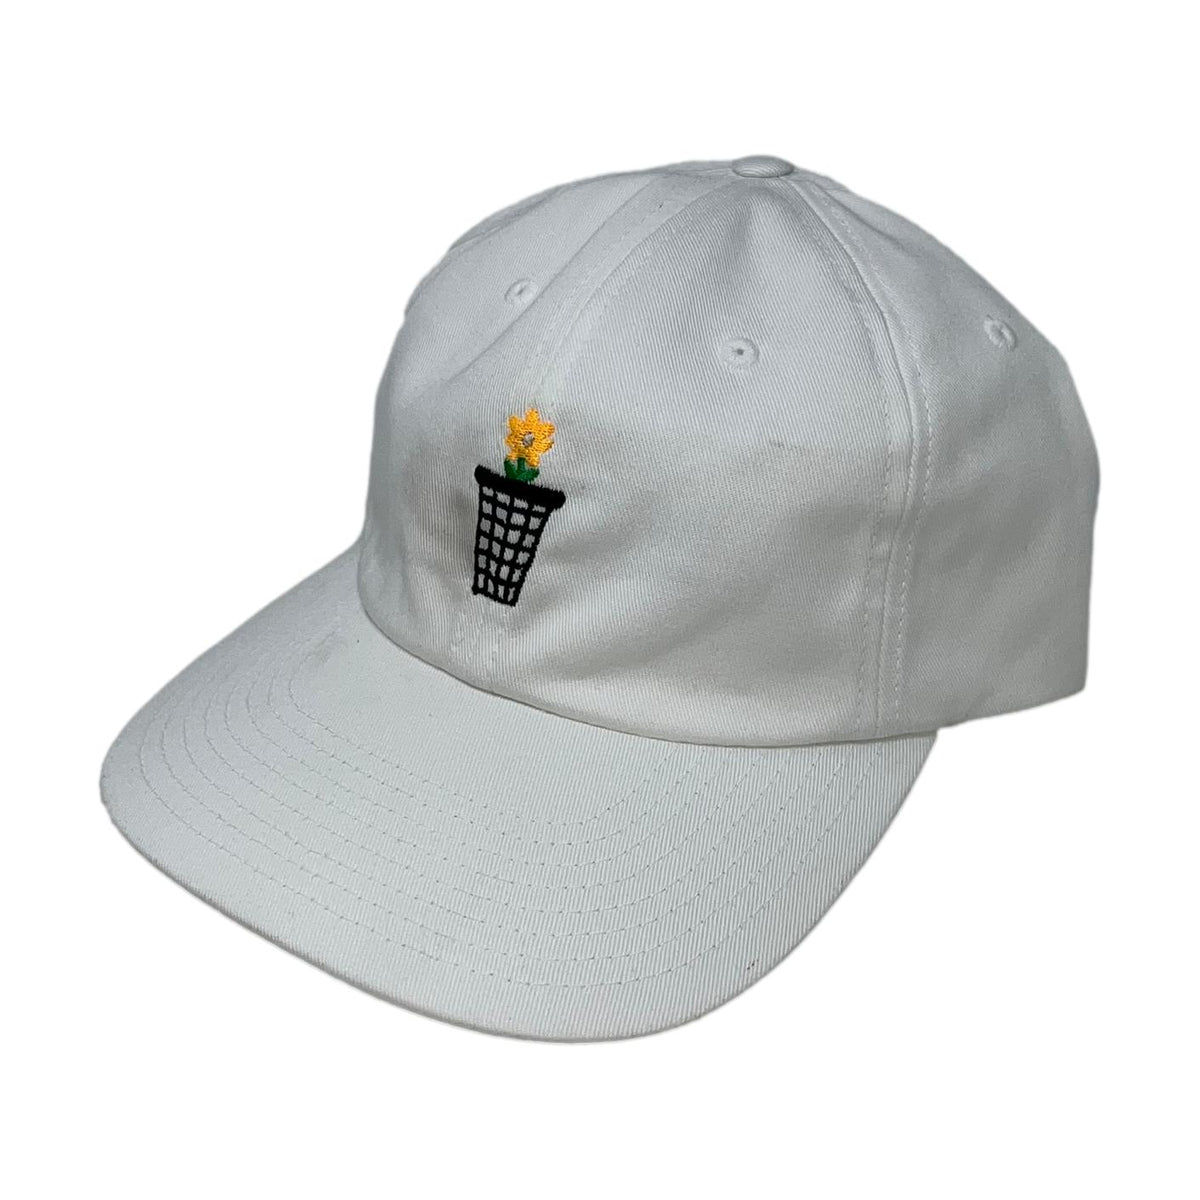 Venue Trashcan Embroidered 6 Panel Hat White